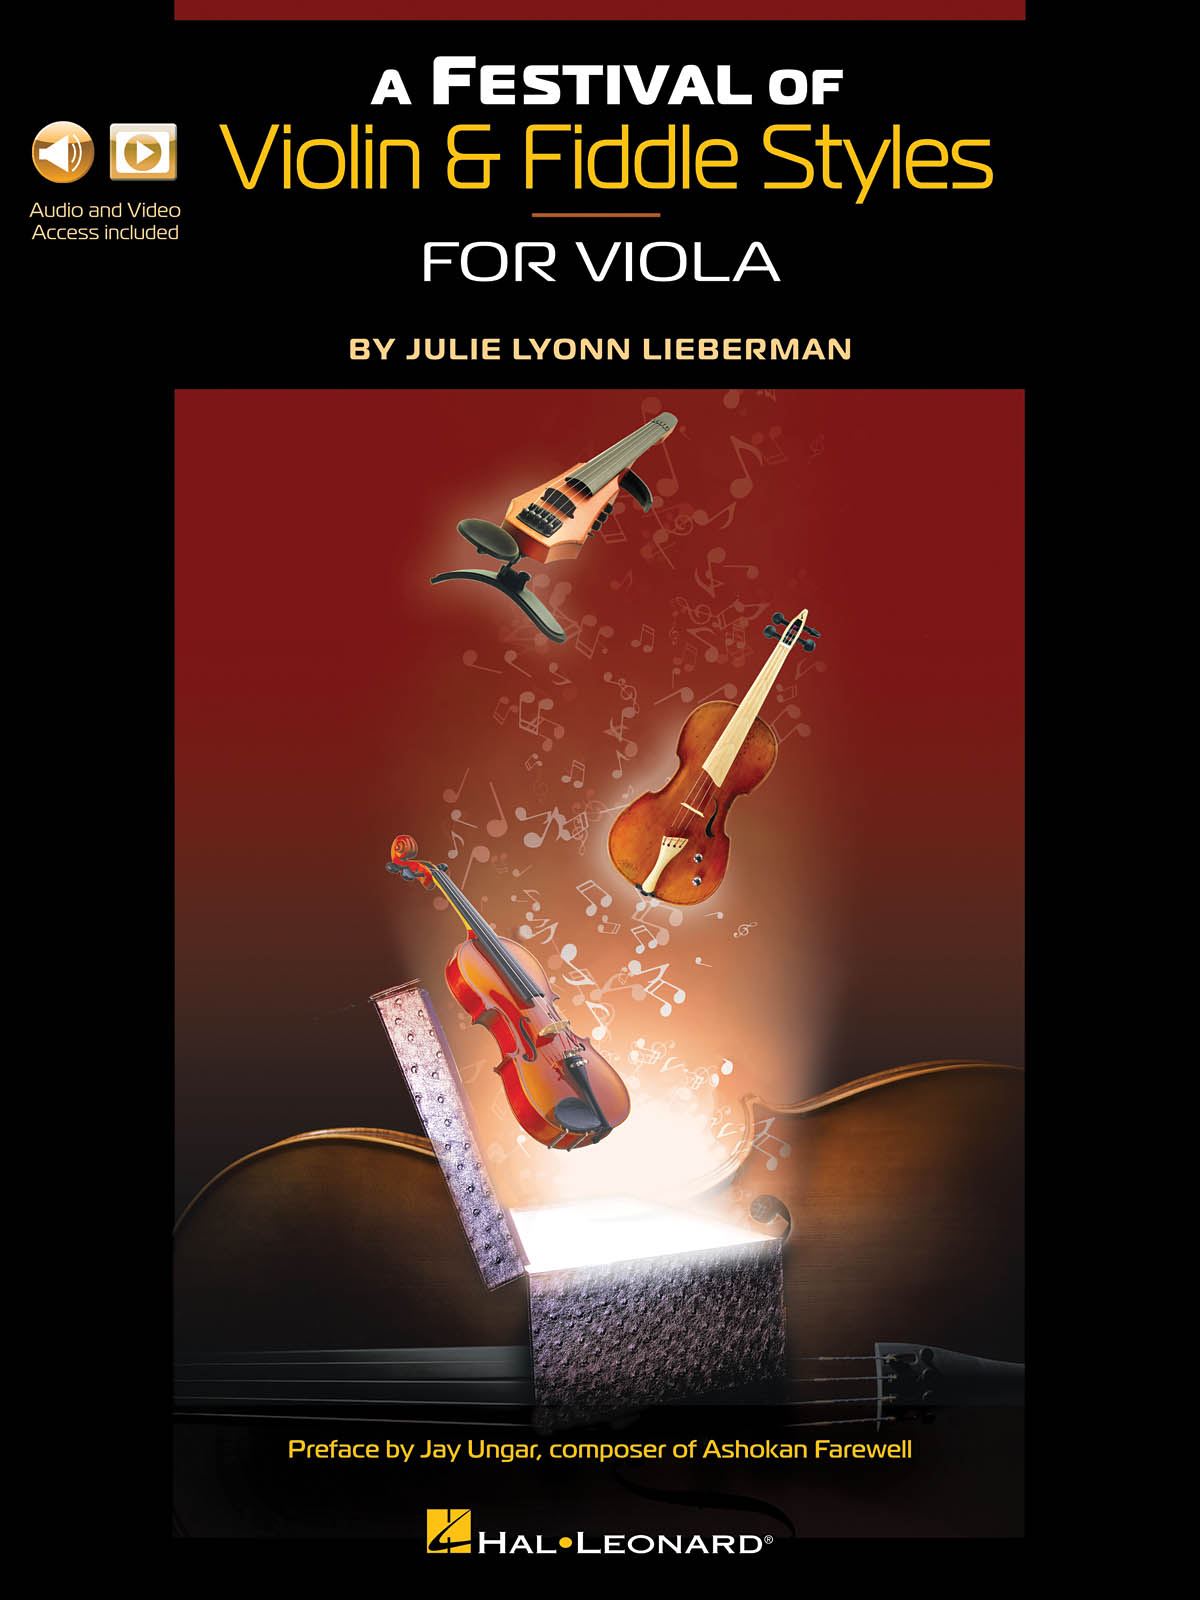 A Festival Of Violin and Fiddle Styles For Viola